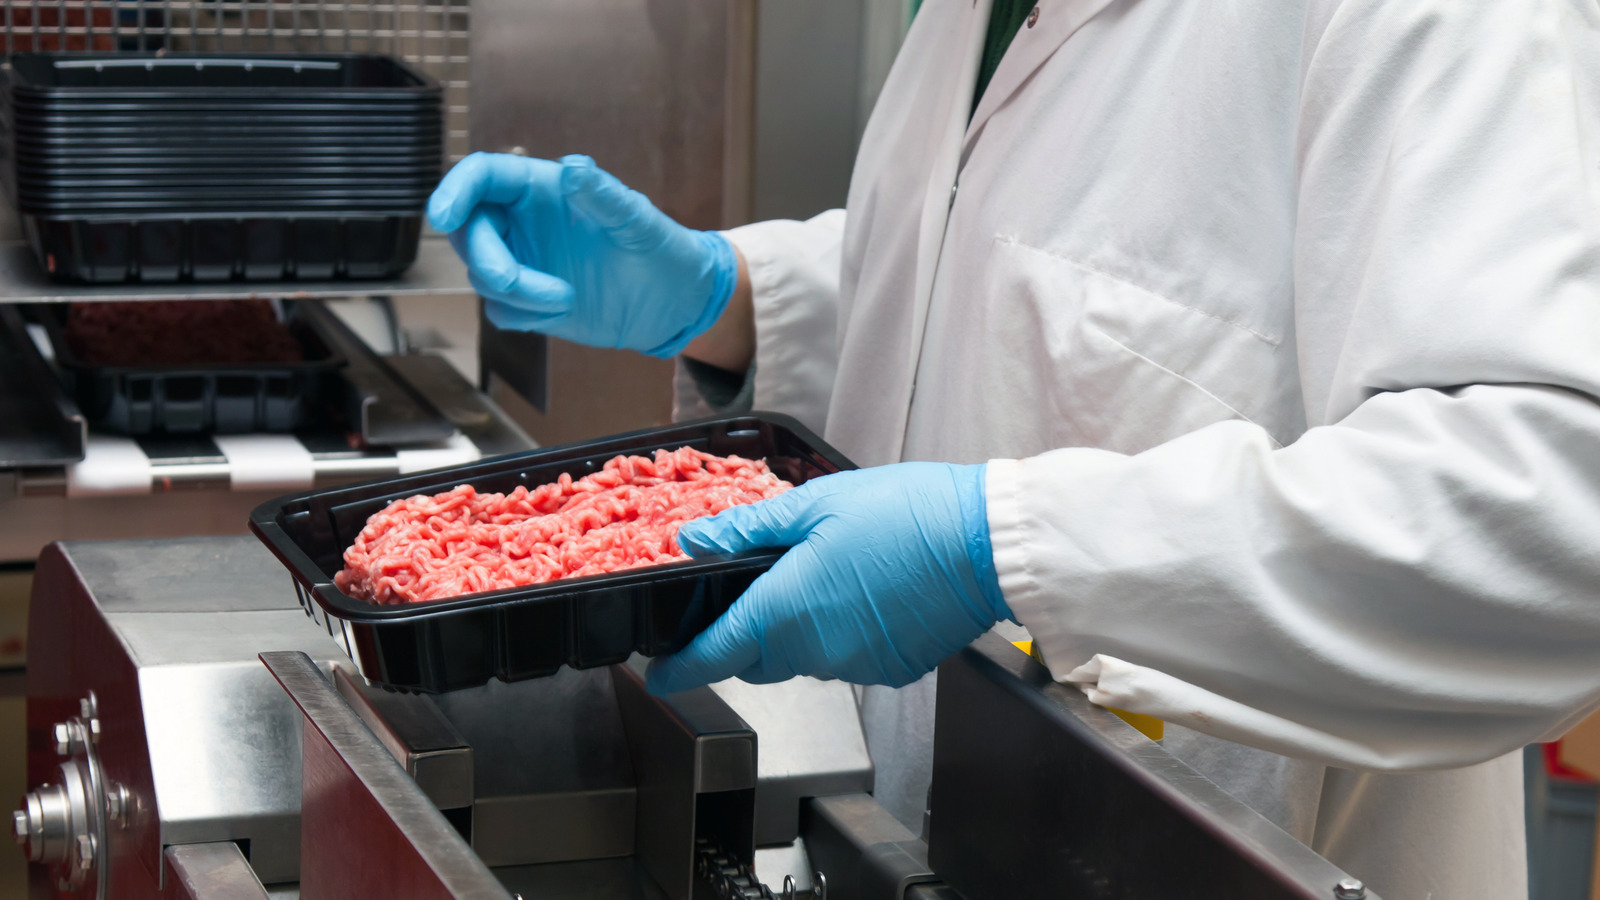 More Than 58,000 Pounds Of Ground Beef Recalled Over E. Coli Concerns